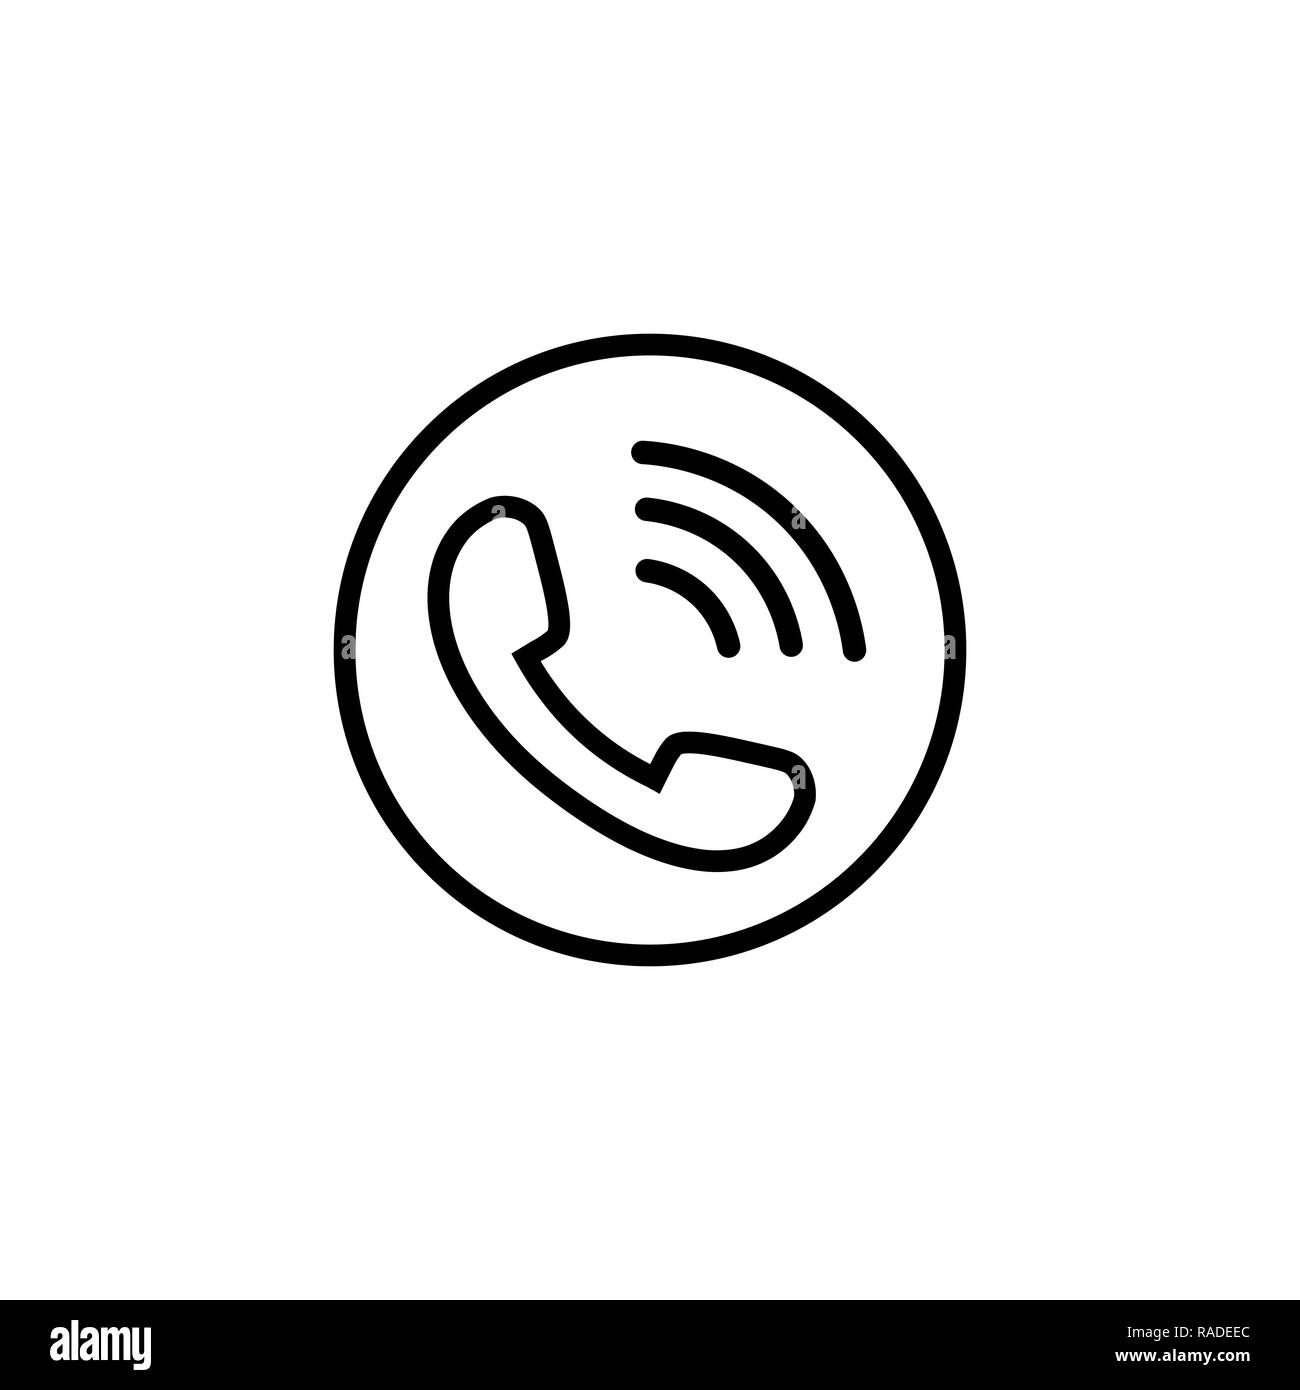 Phone line icon in black with waves Stock Vector